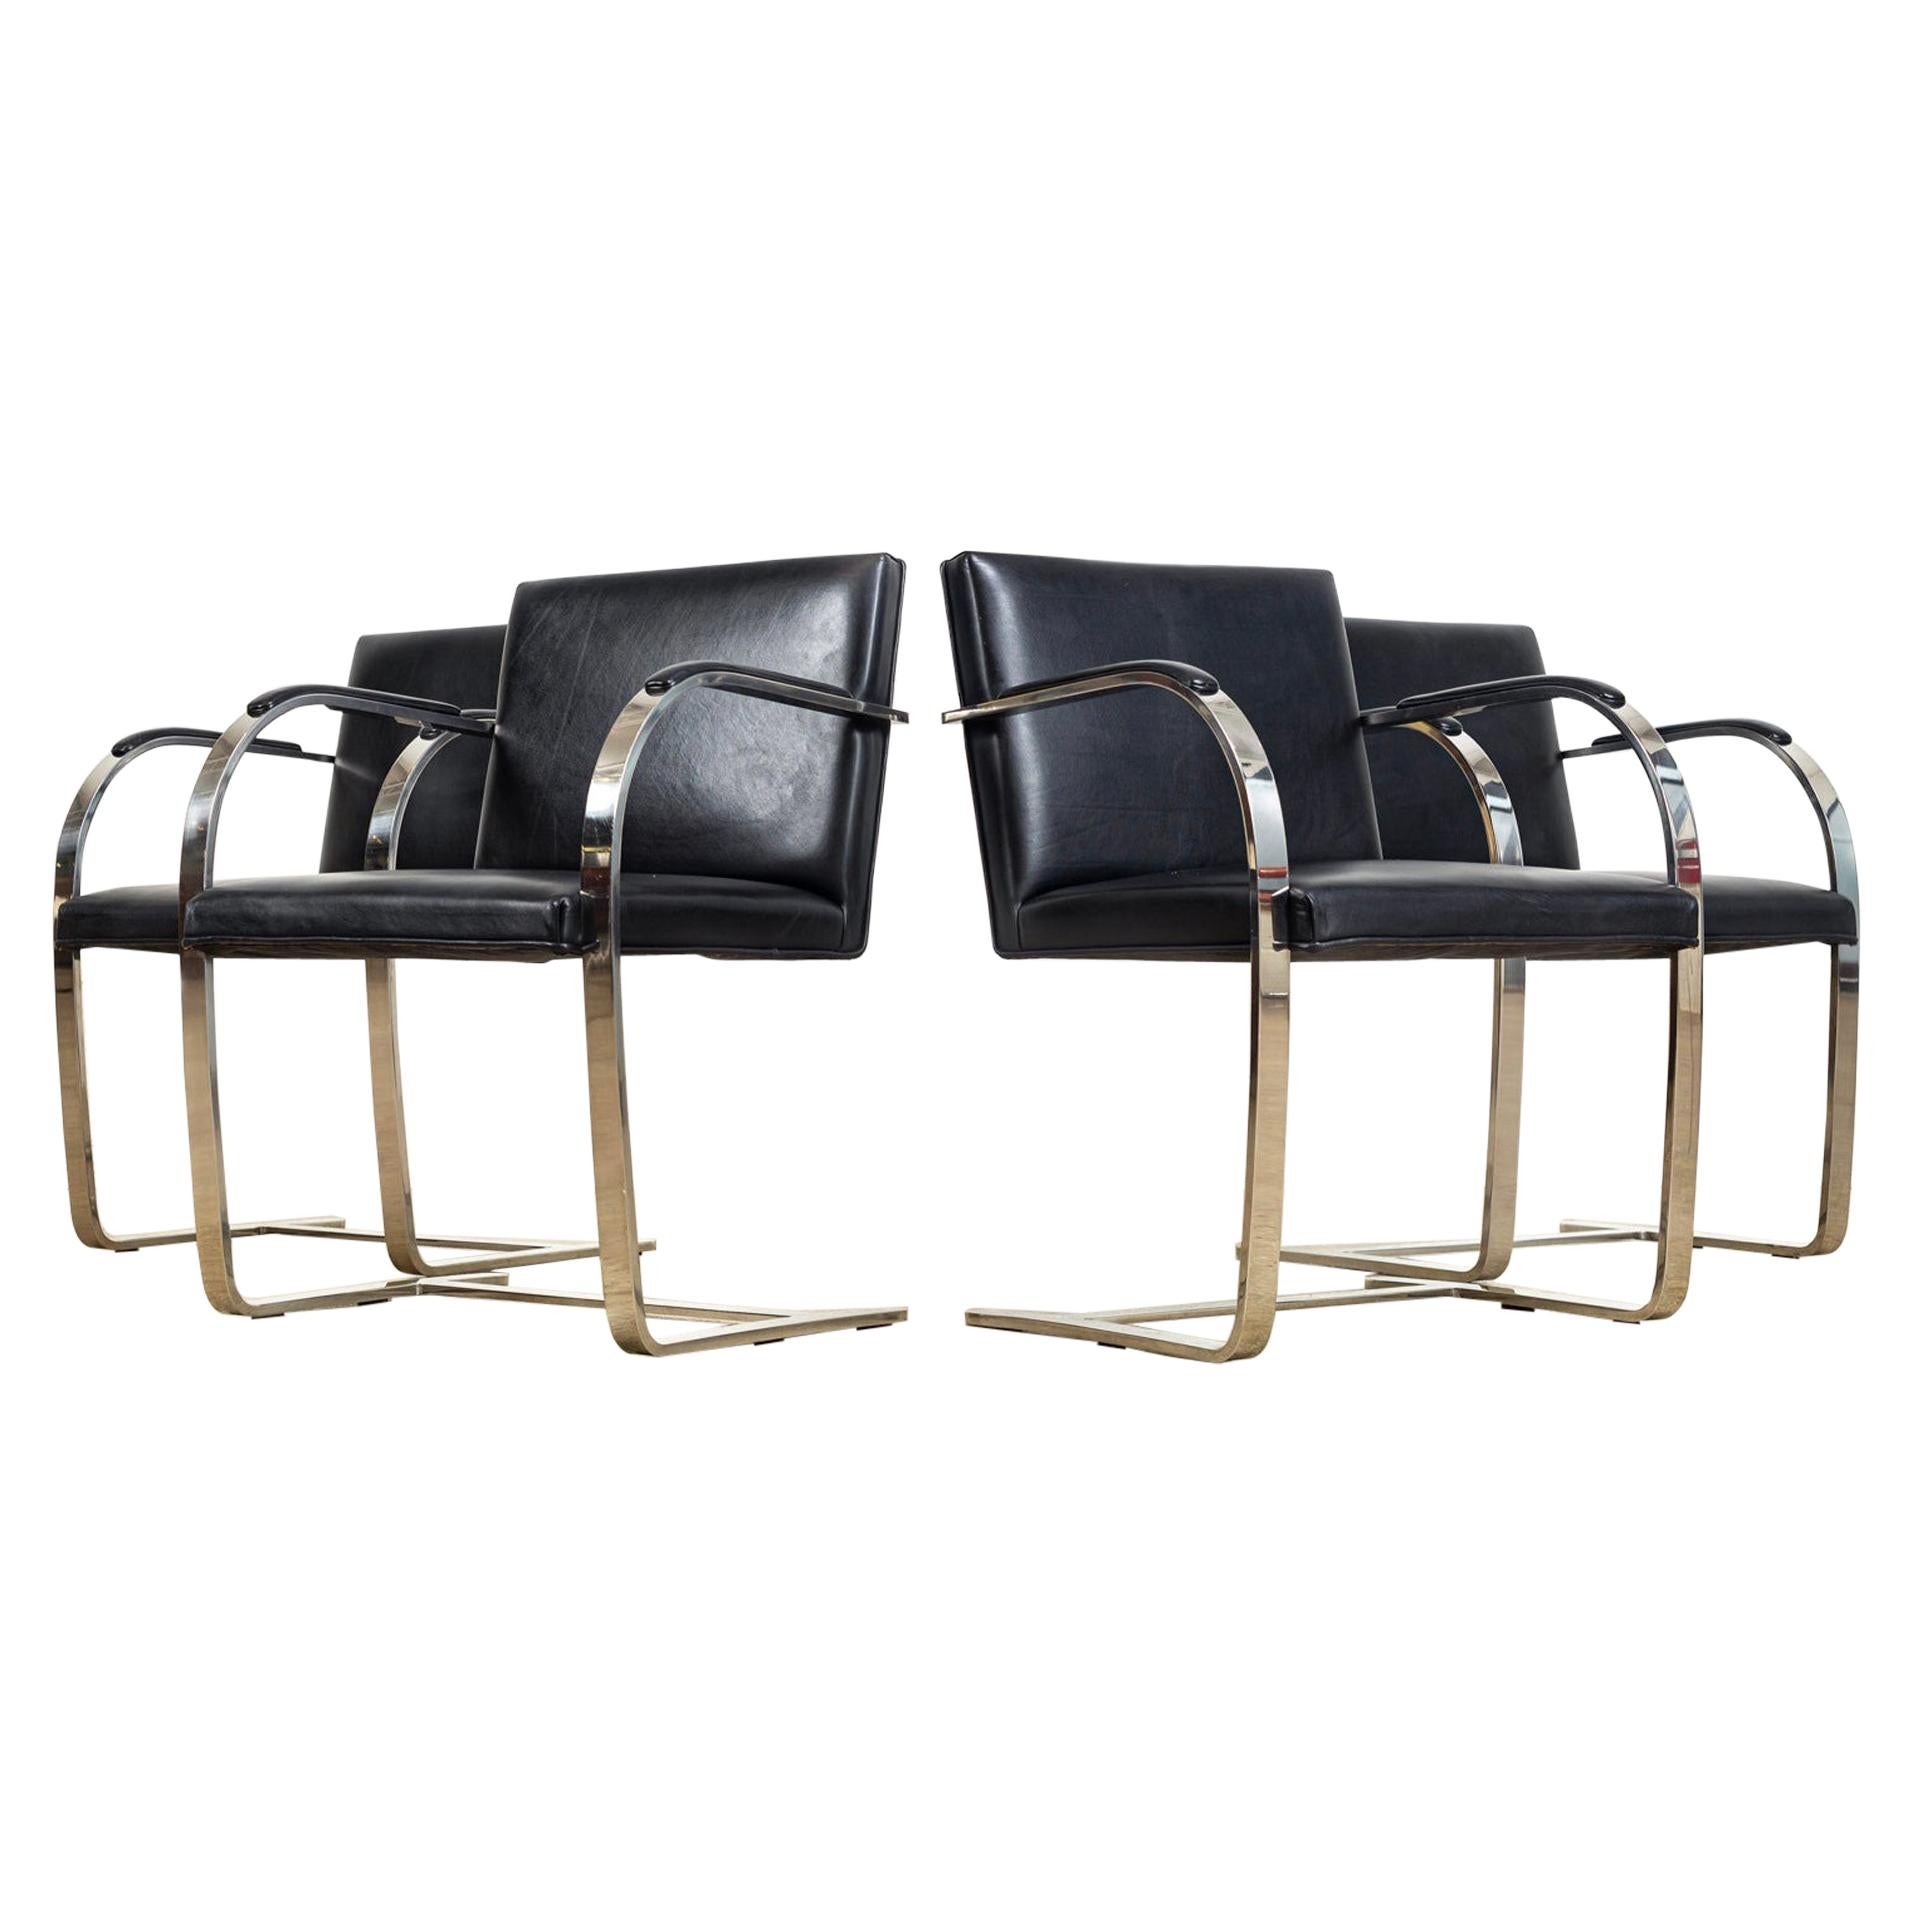 Mies van der Rohe Knoll Brno Flat Bar Black Leather & Chrome Chairs, Set of 4 For Sale